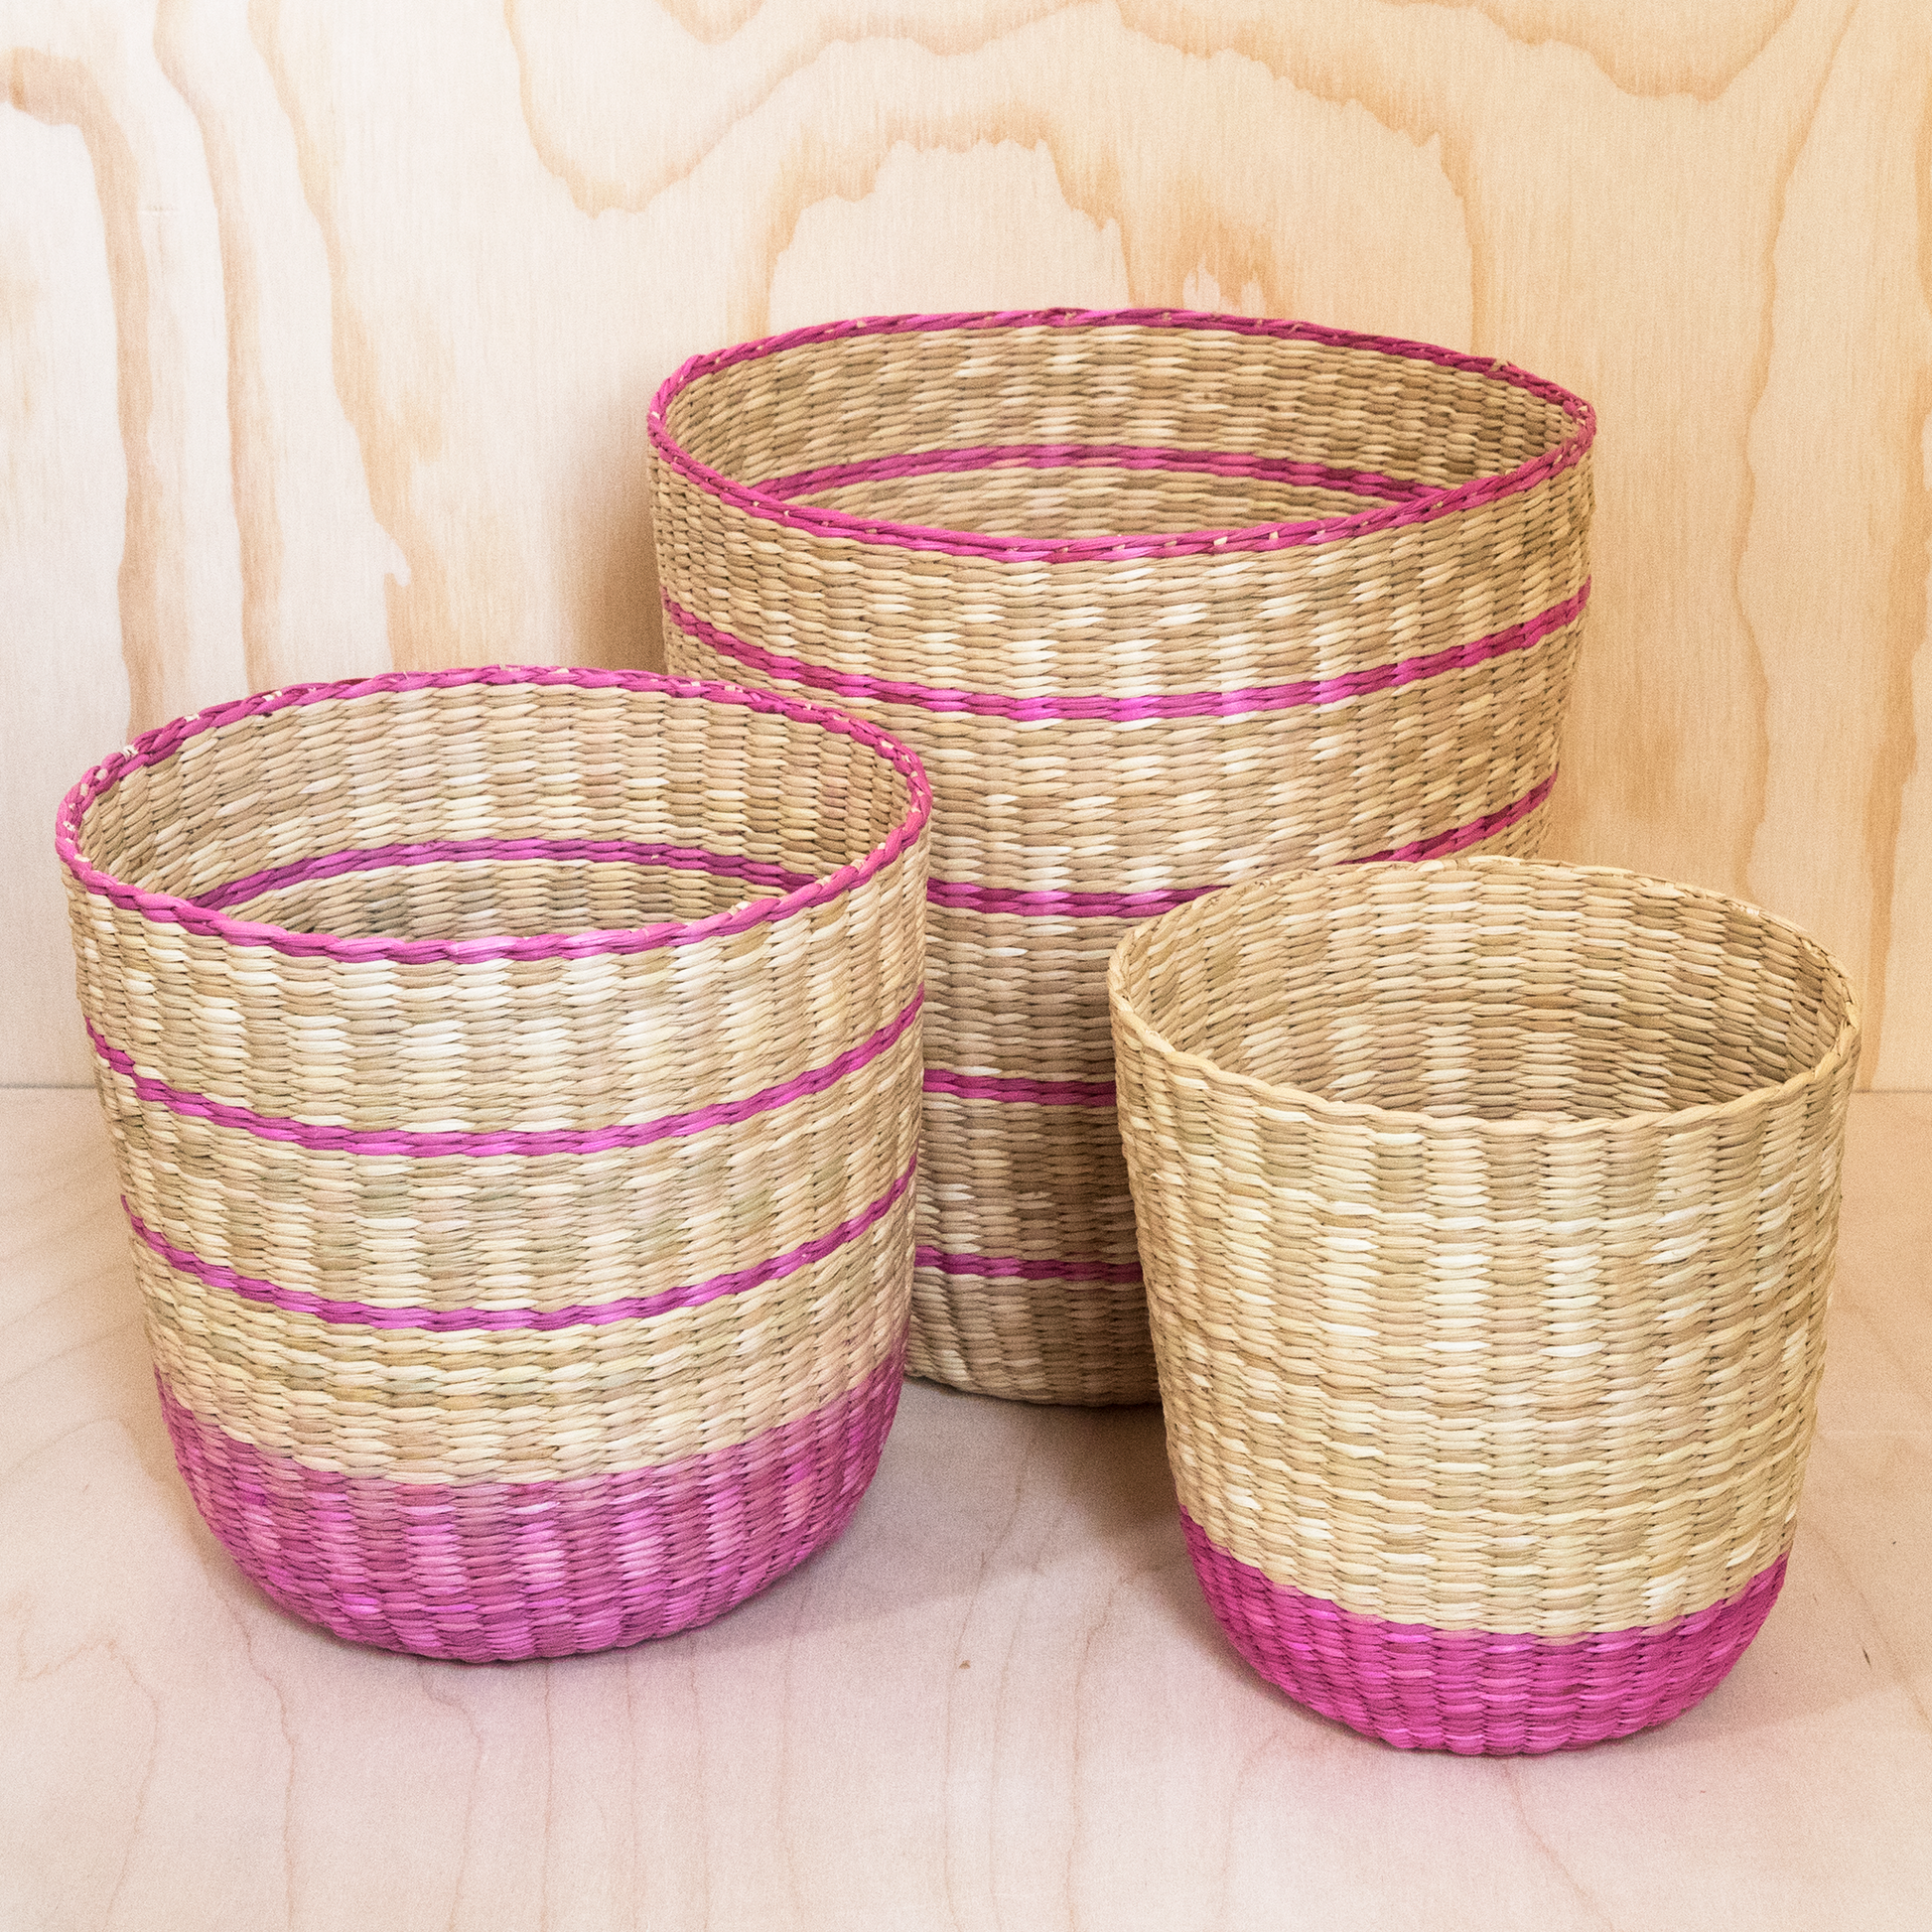 intiearth nesting baskets handwoven junco reed pink